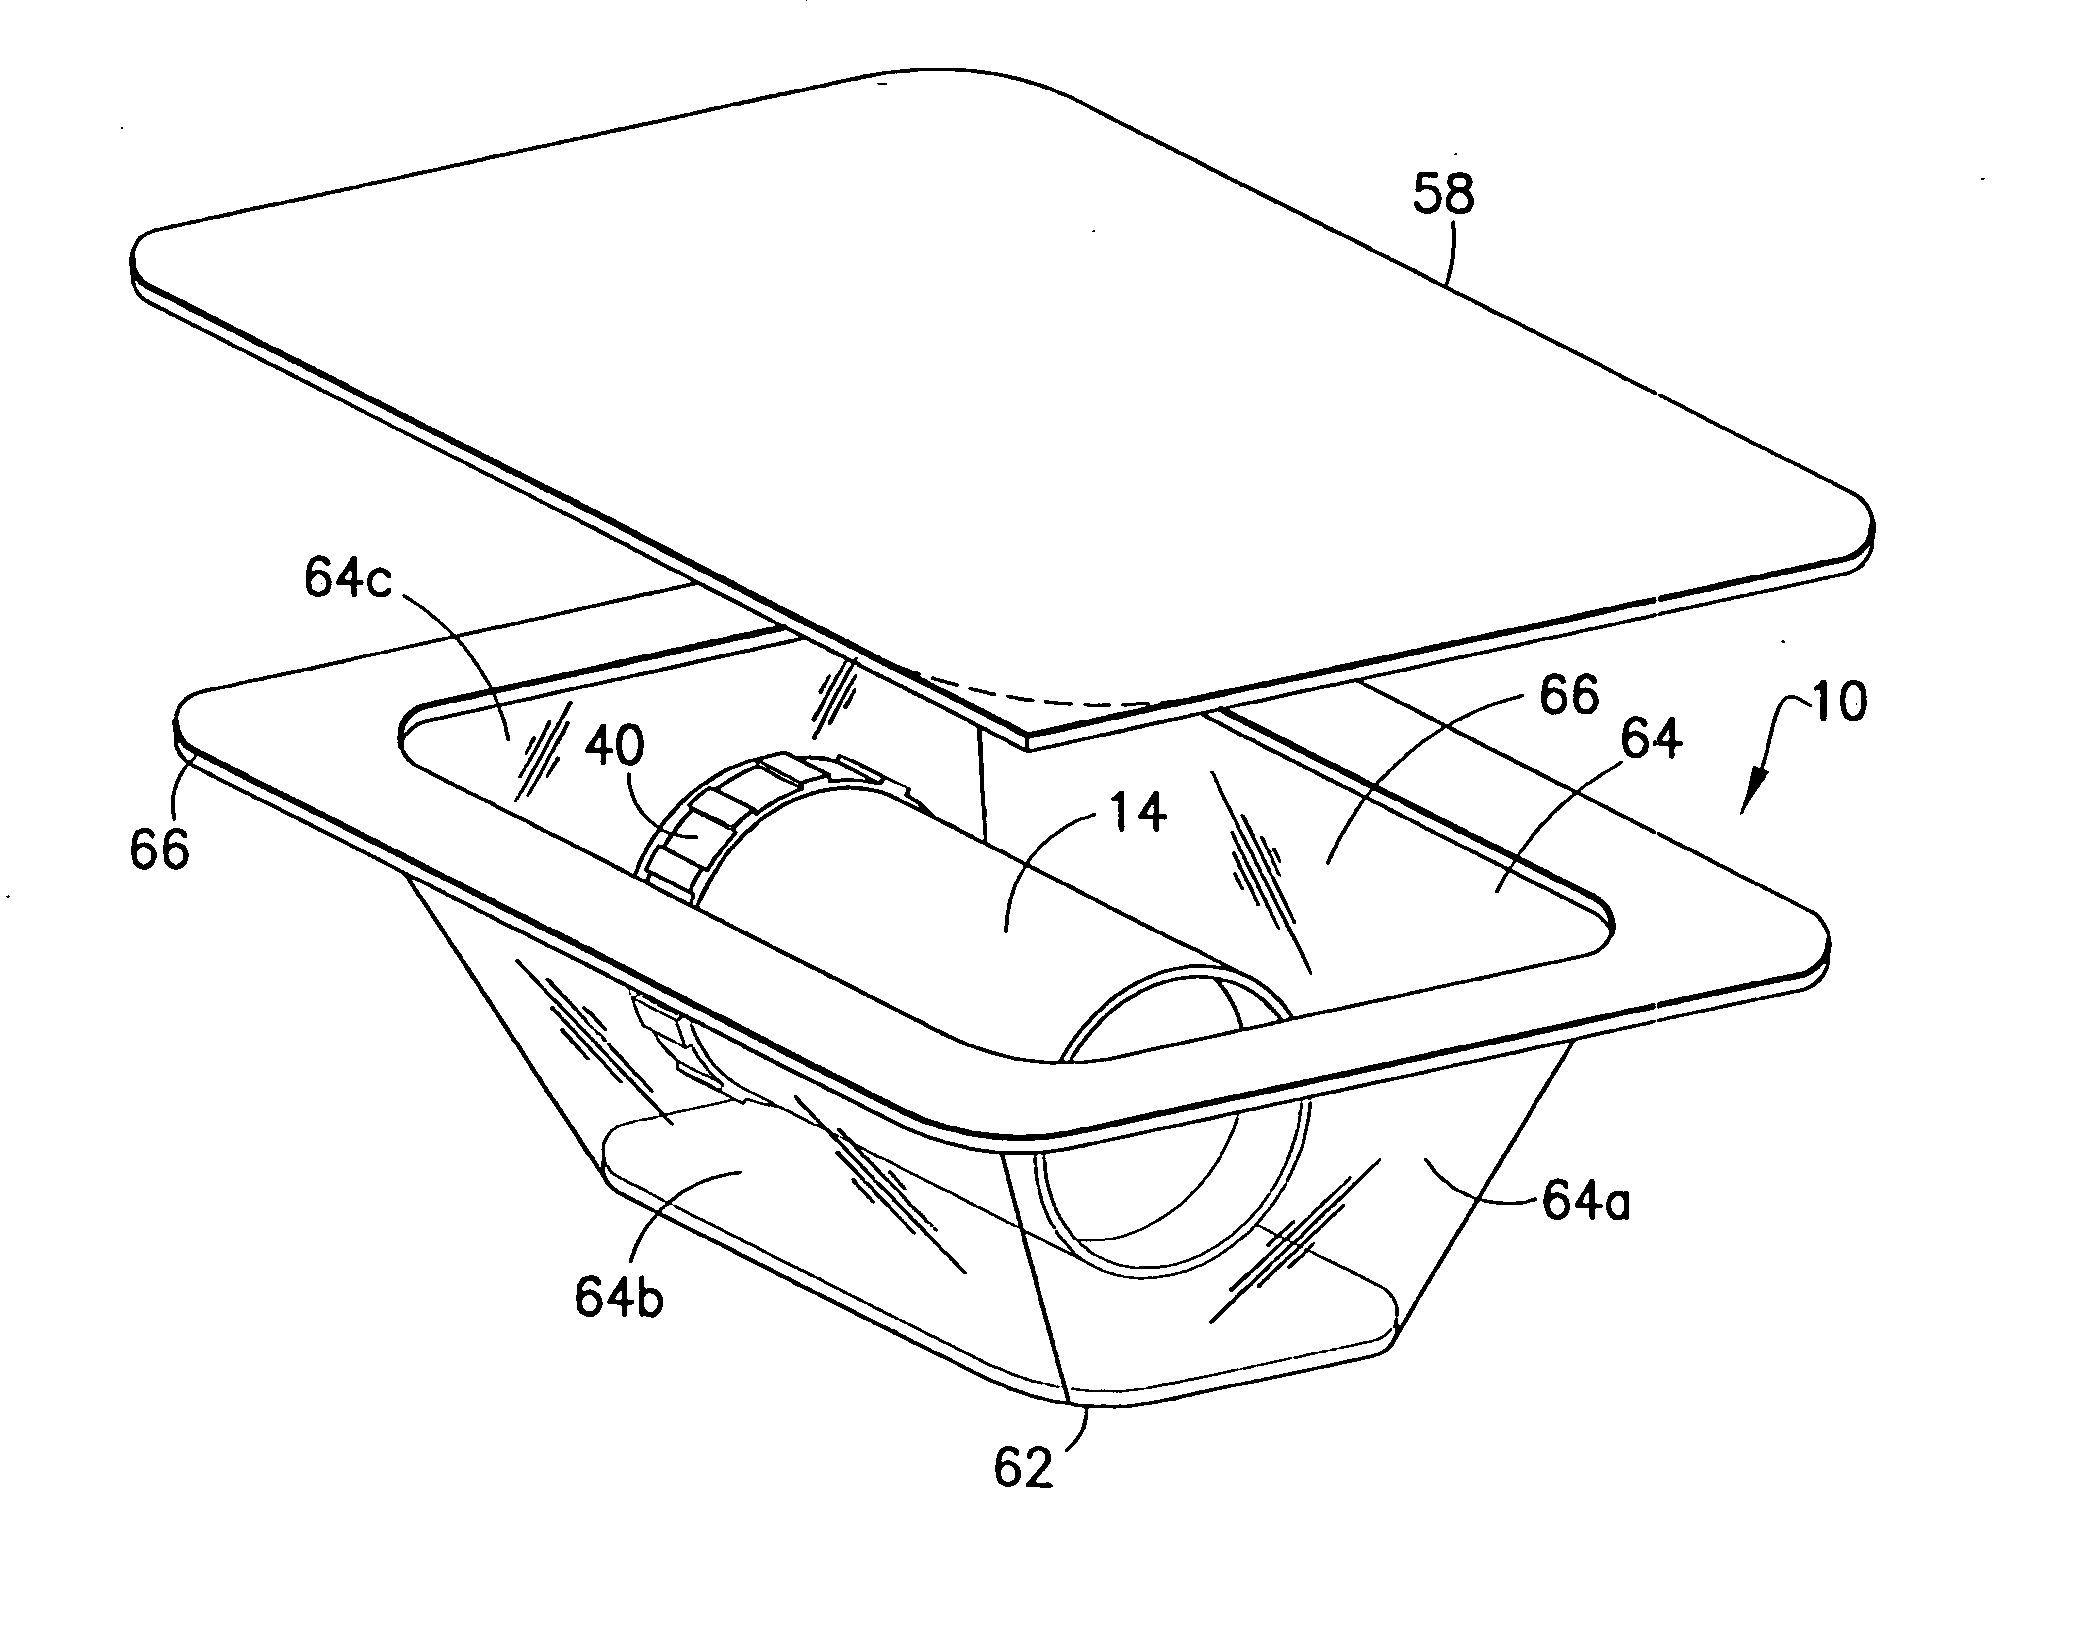 Tissue preservation assembly and method of making and using the same